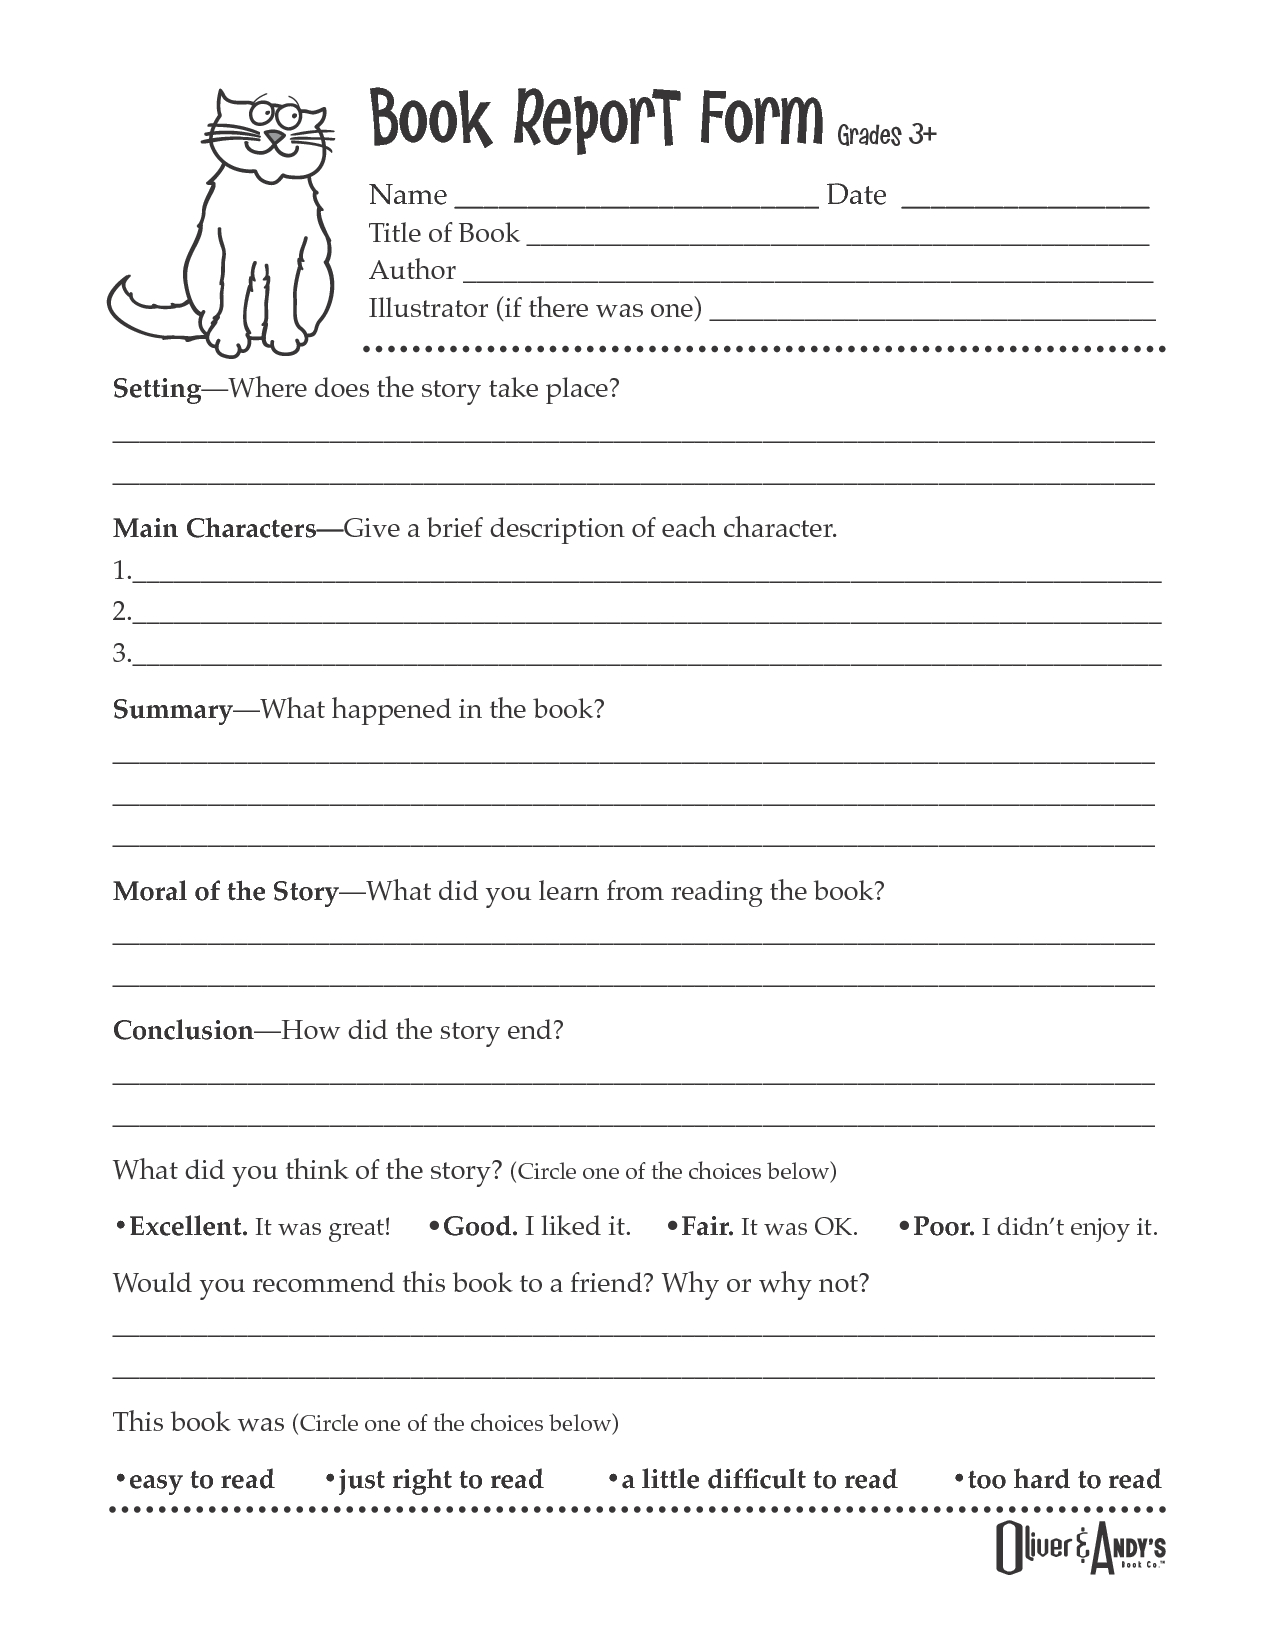 Second Grade Book Report Template  Book Report Form Grades for Story Report Template